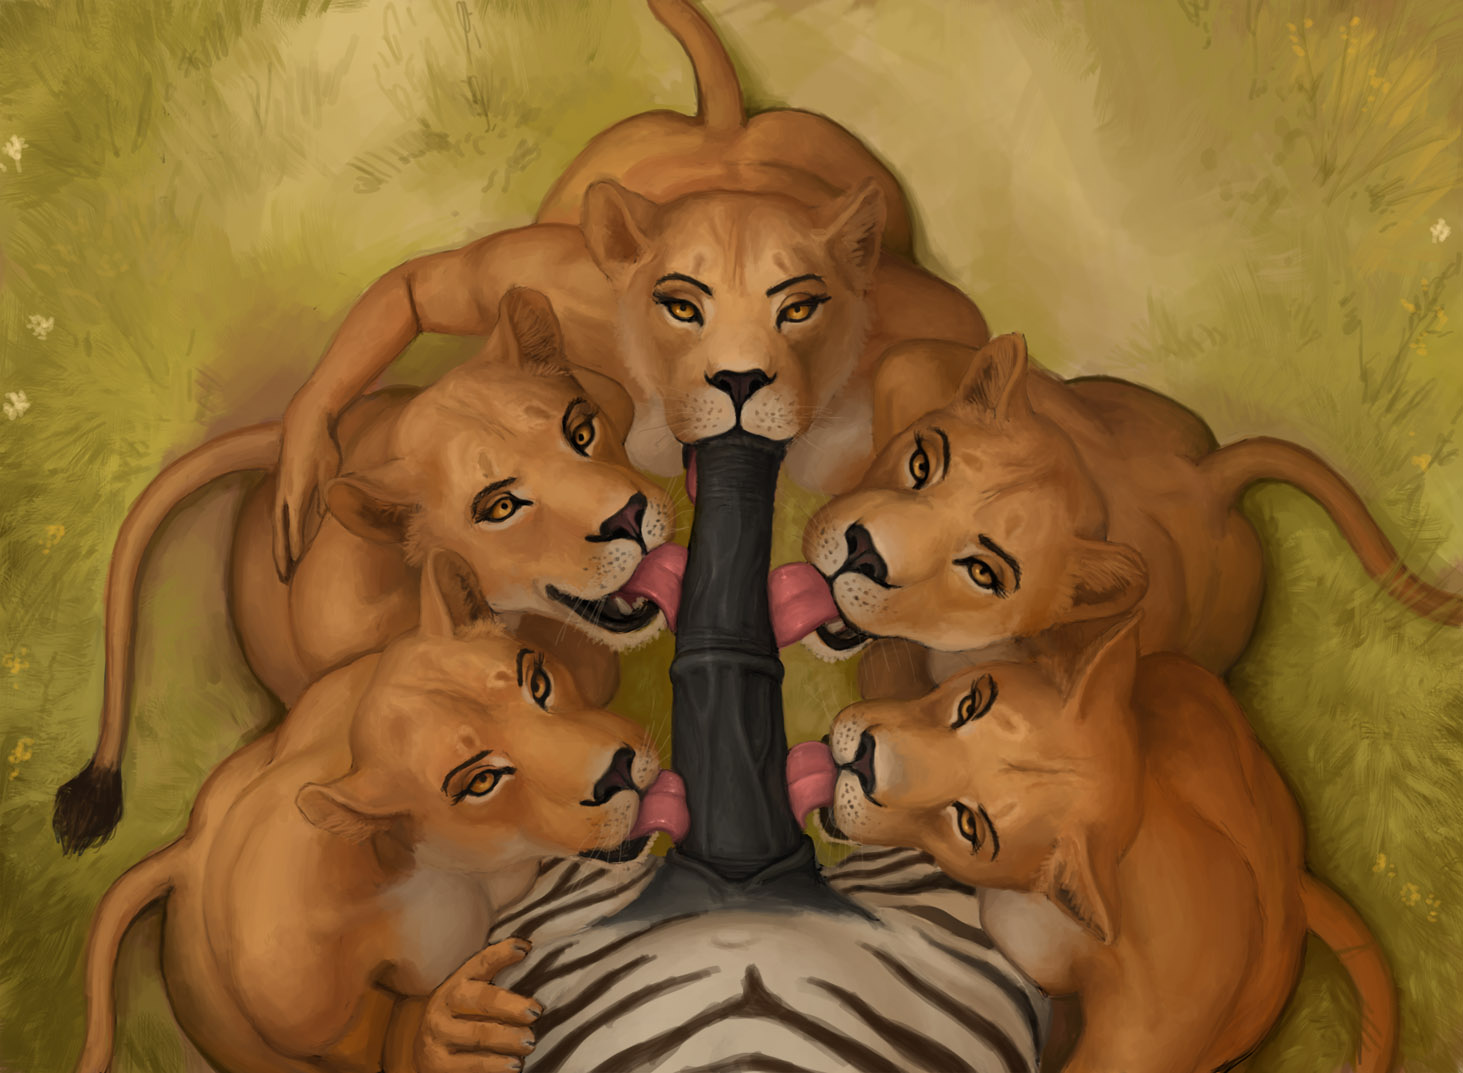 Pack of Hungry Lionesses Devour a Zebra MFFFFF (morticus). 